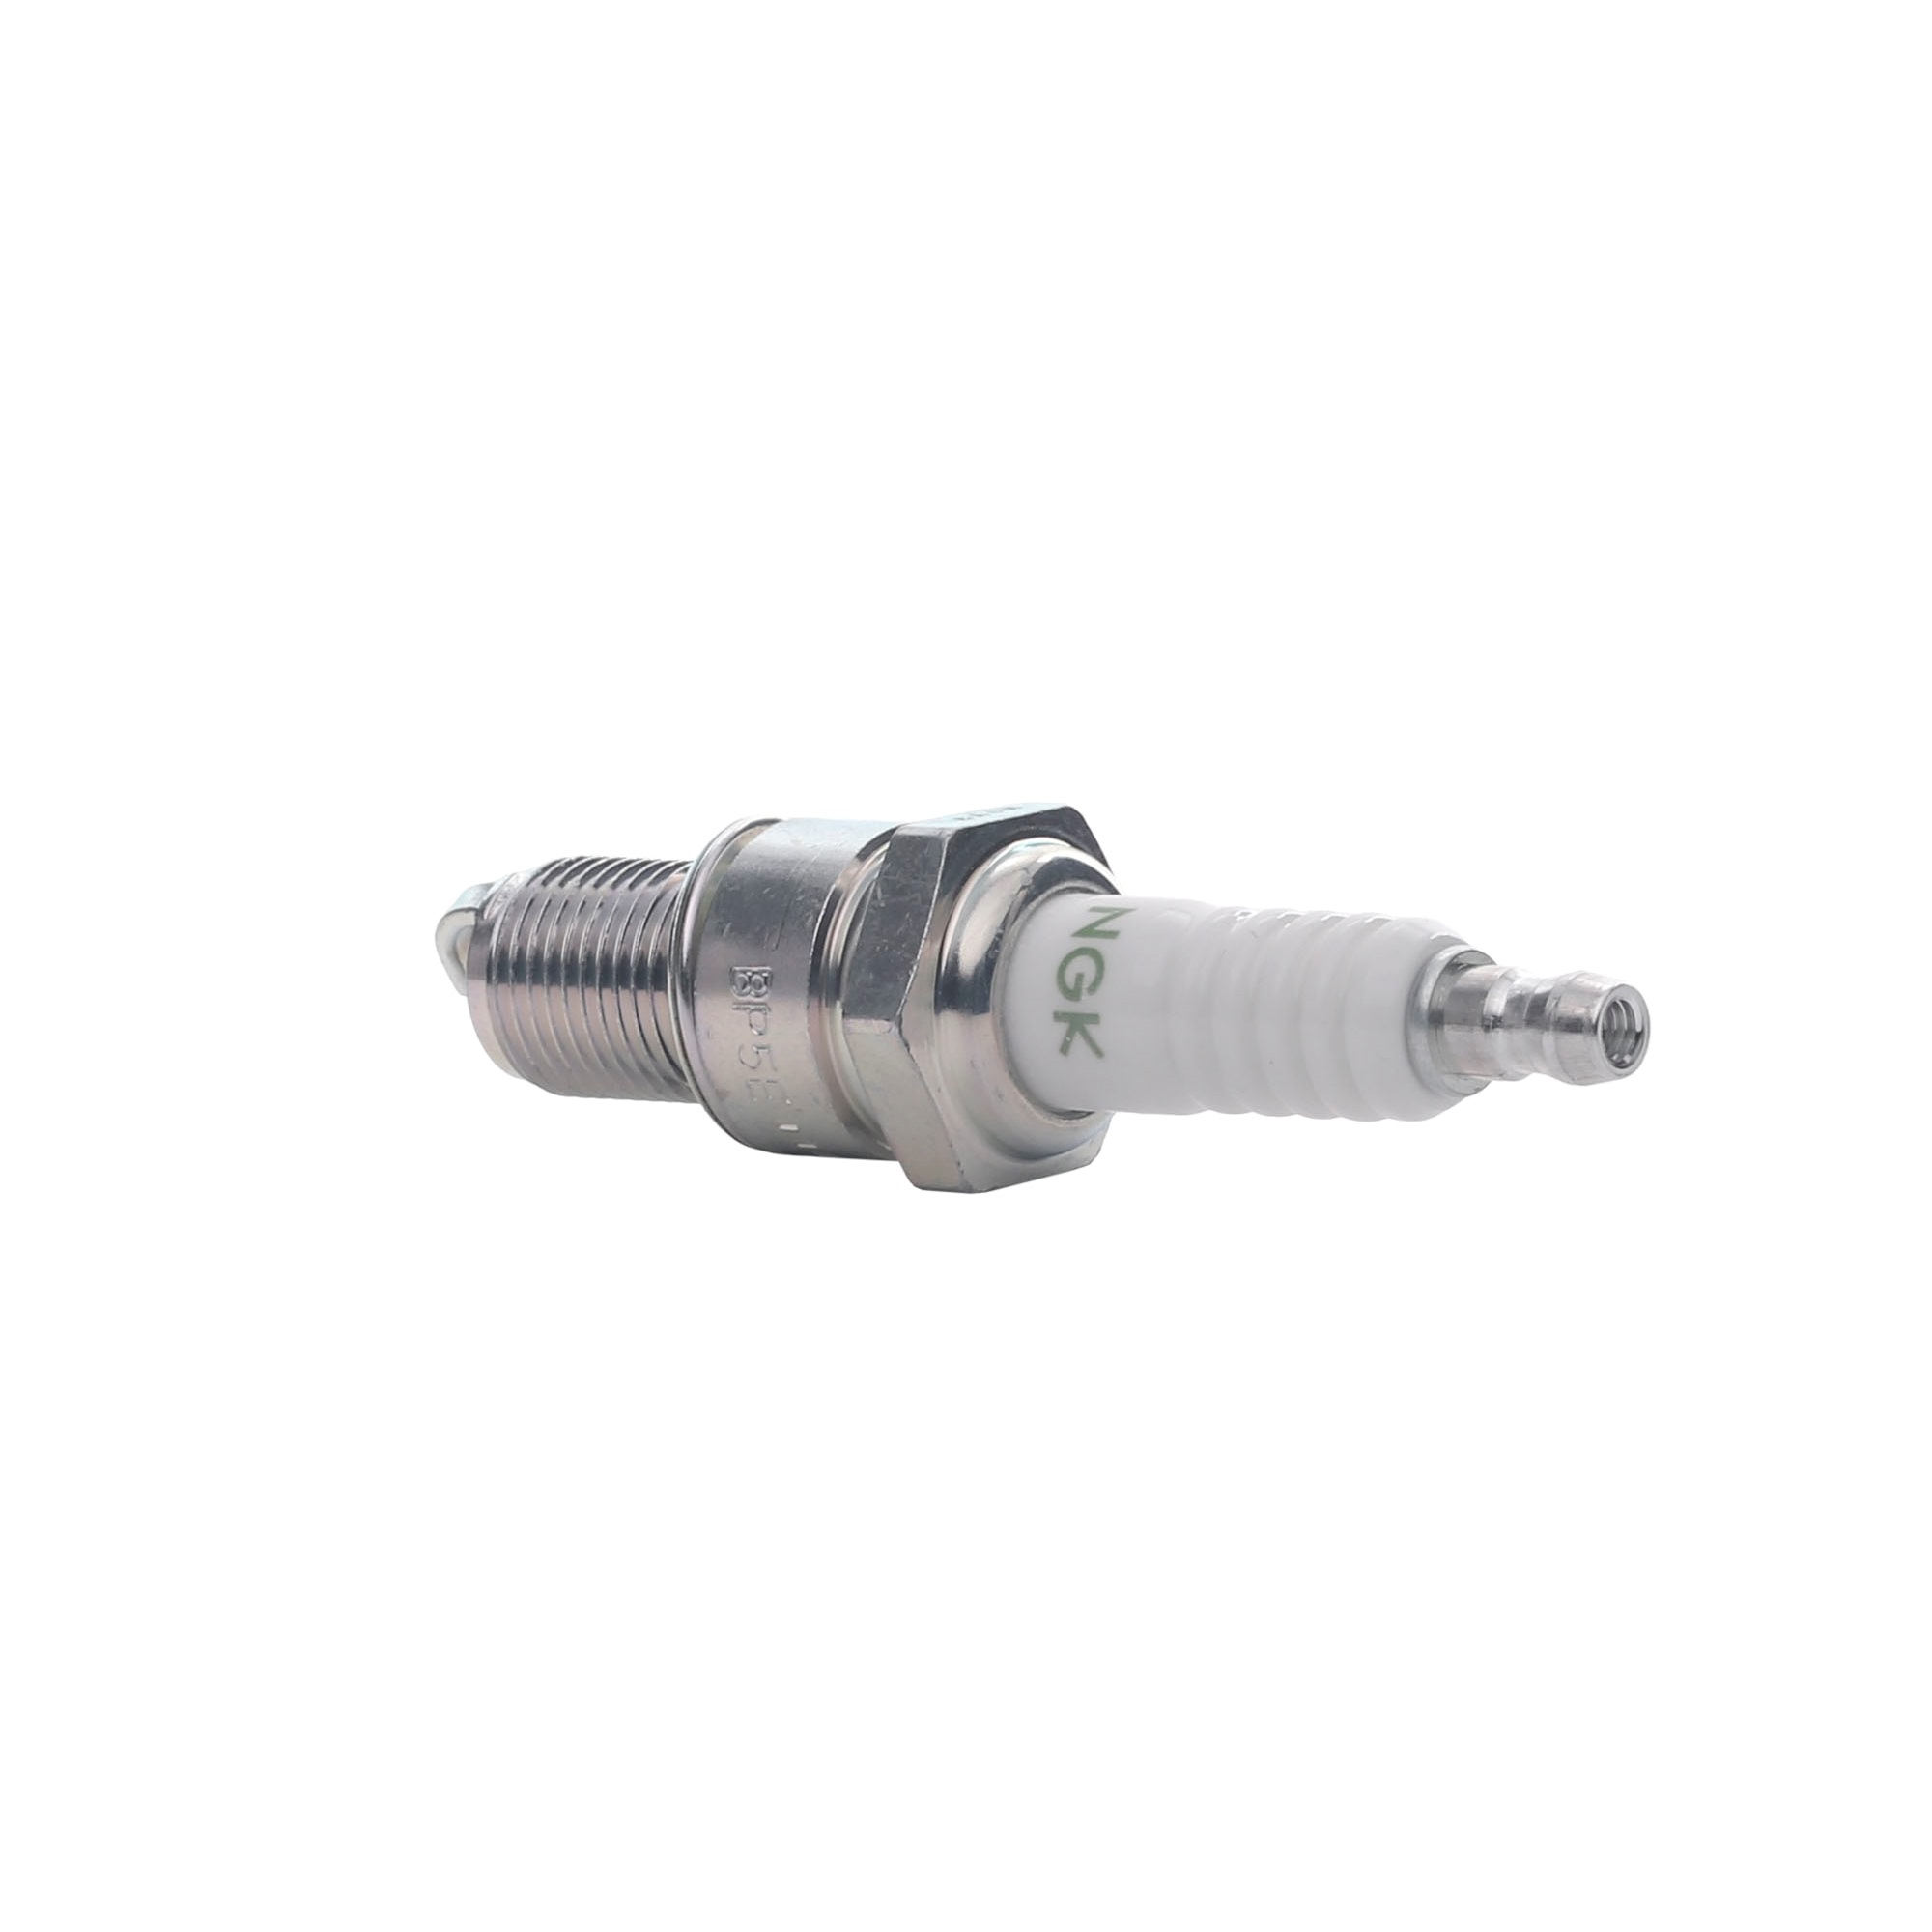 BP5E NGK 4669 Spark plug LAND ROVER experience and price